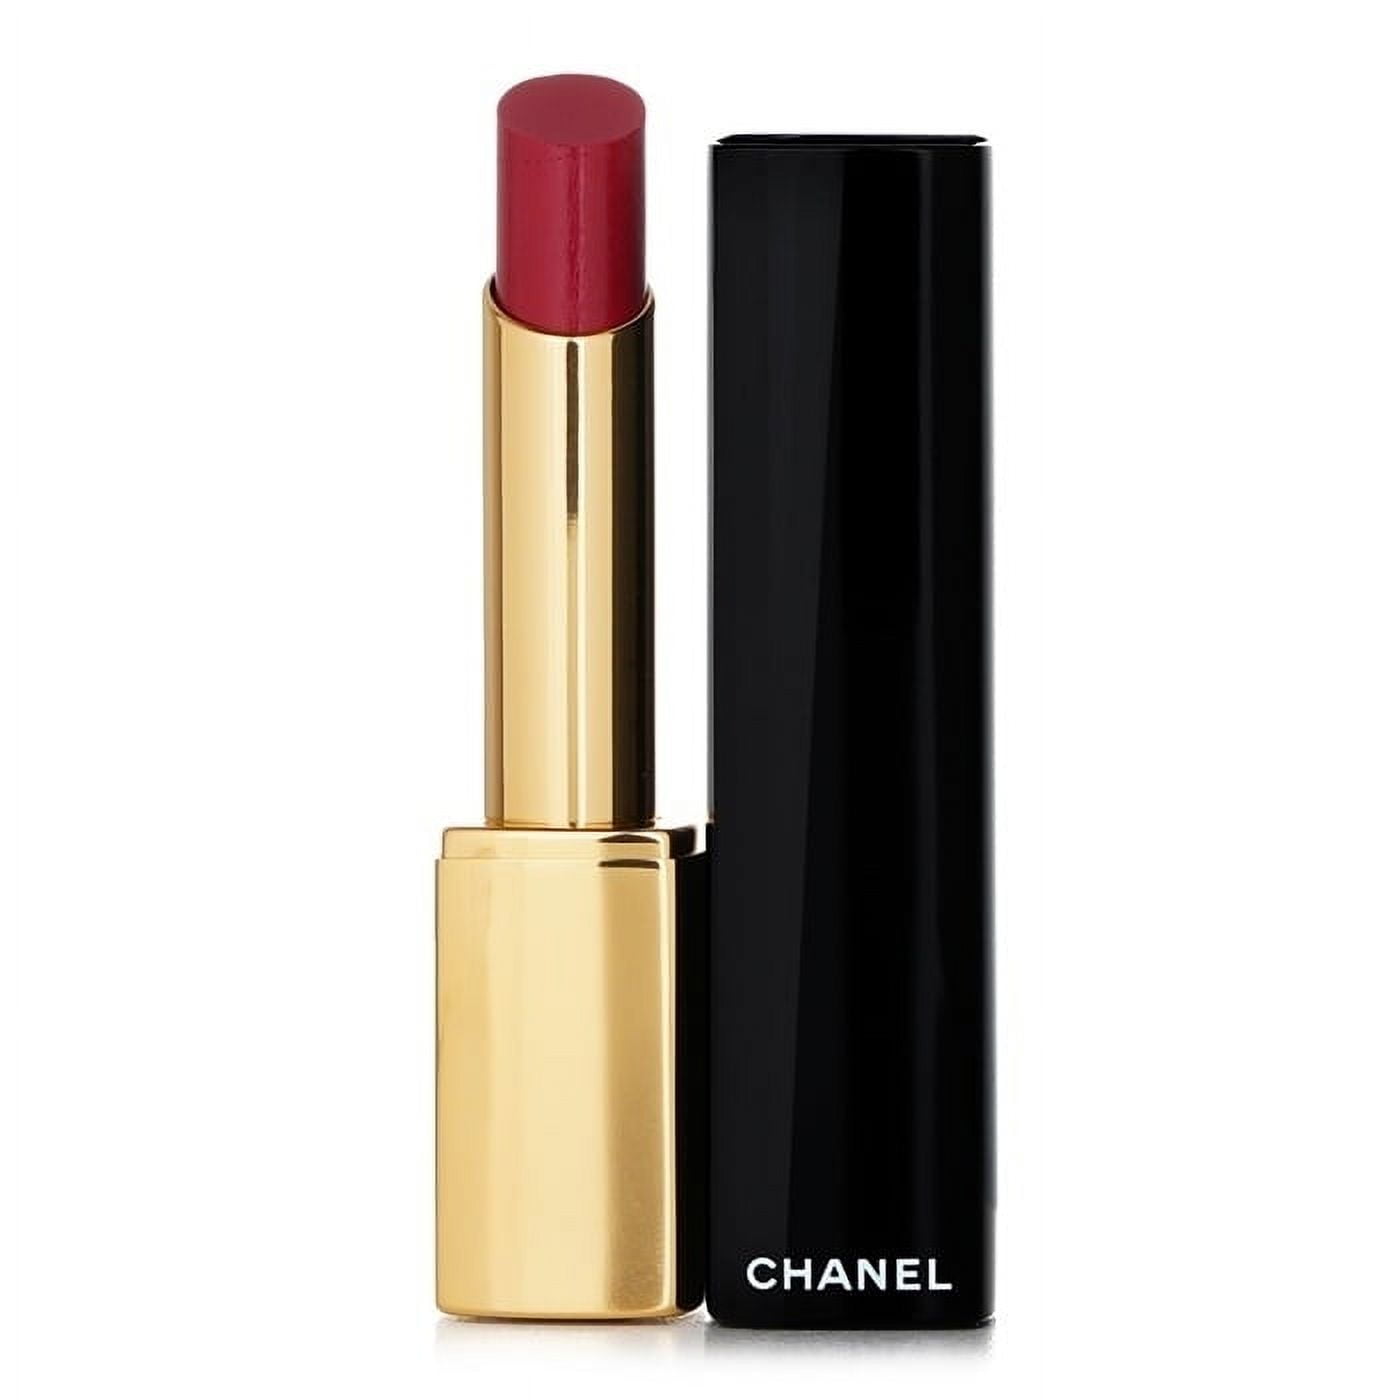 CHANEL HIGH-INTENSITY LIP COLOUR CONCENTRATED RADIANCE AND CARE